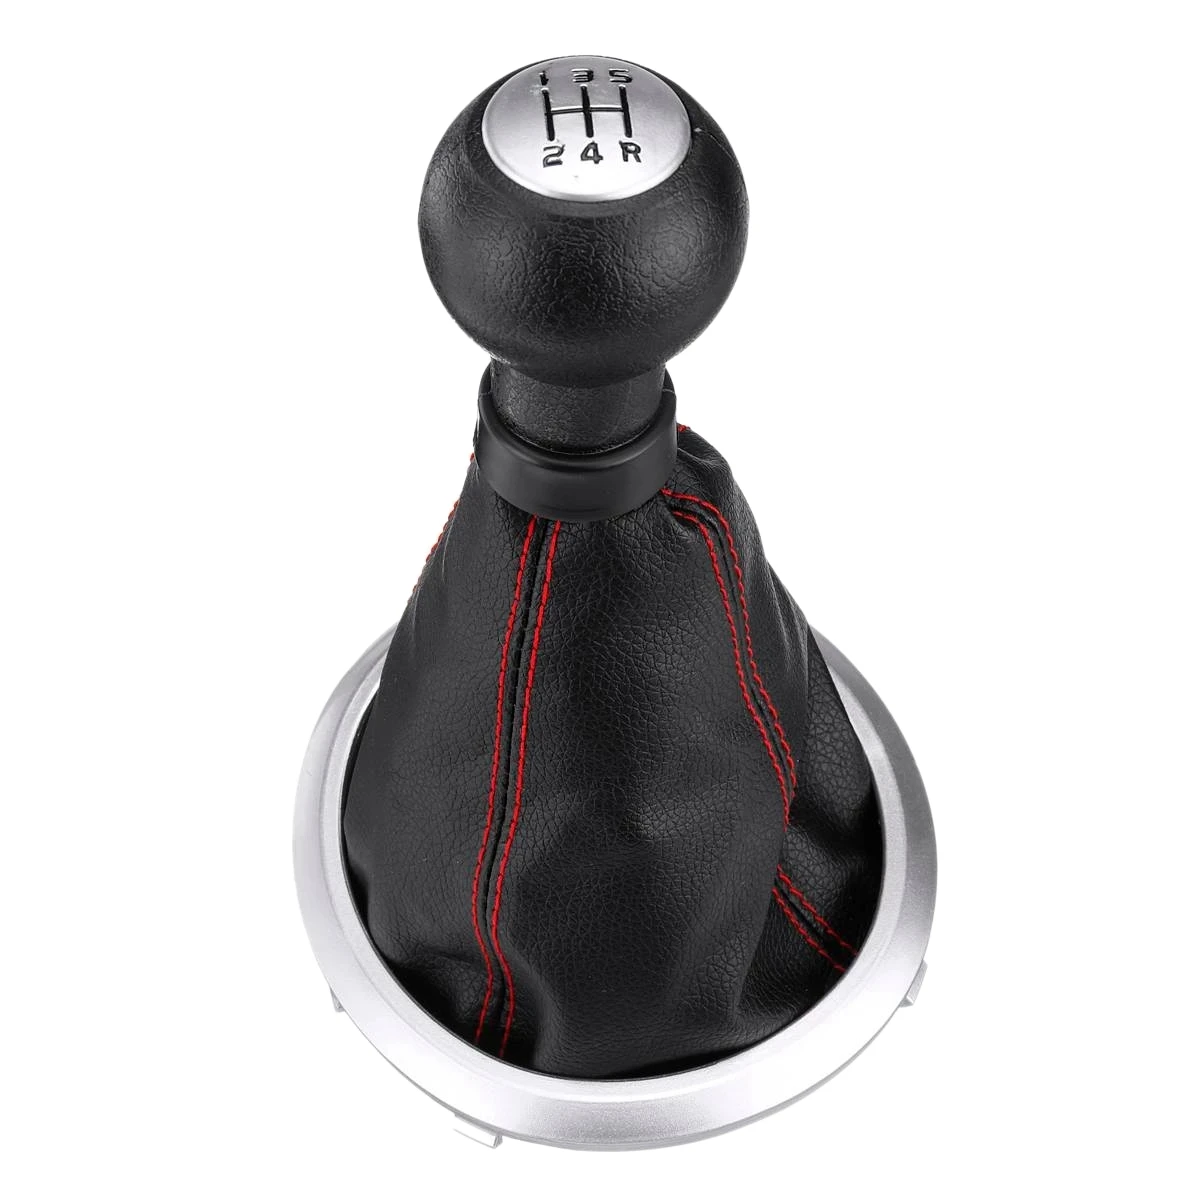 

5-Speed Car Gear Shift Knob Cover Central Control Gear Head with Dust Cover for Swift 2005-2010 SX4 2007-2013